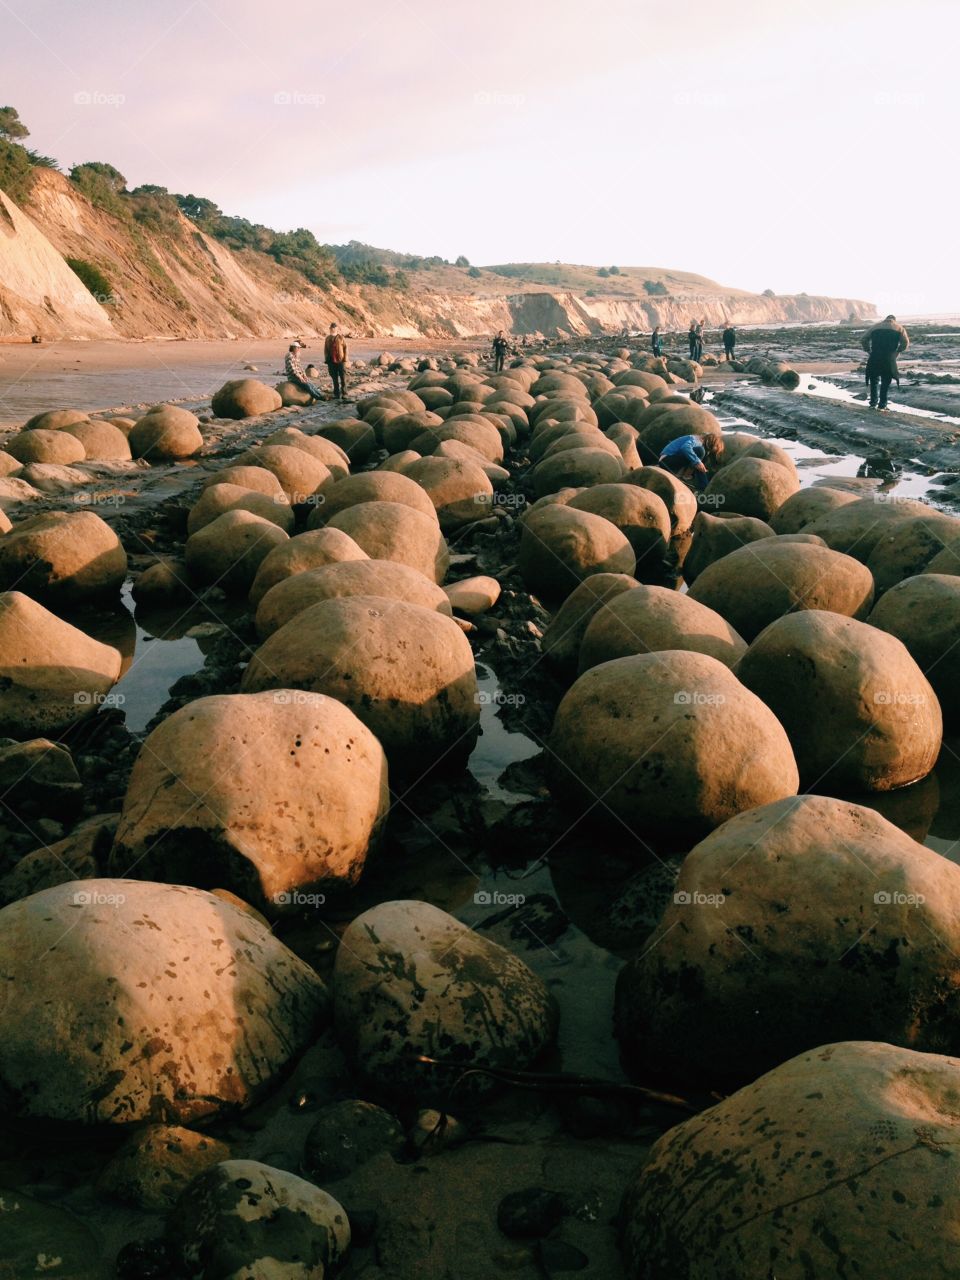 Bowling Ball Beach . Winter vacation in Mendocino county to beach with cool geological formations 